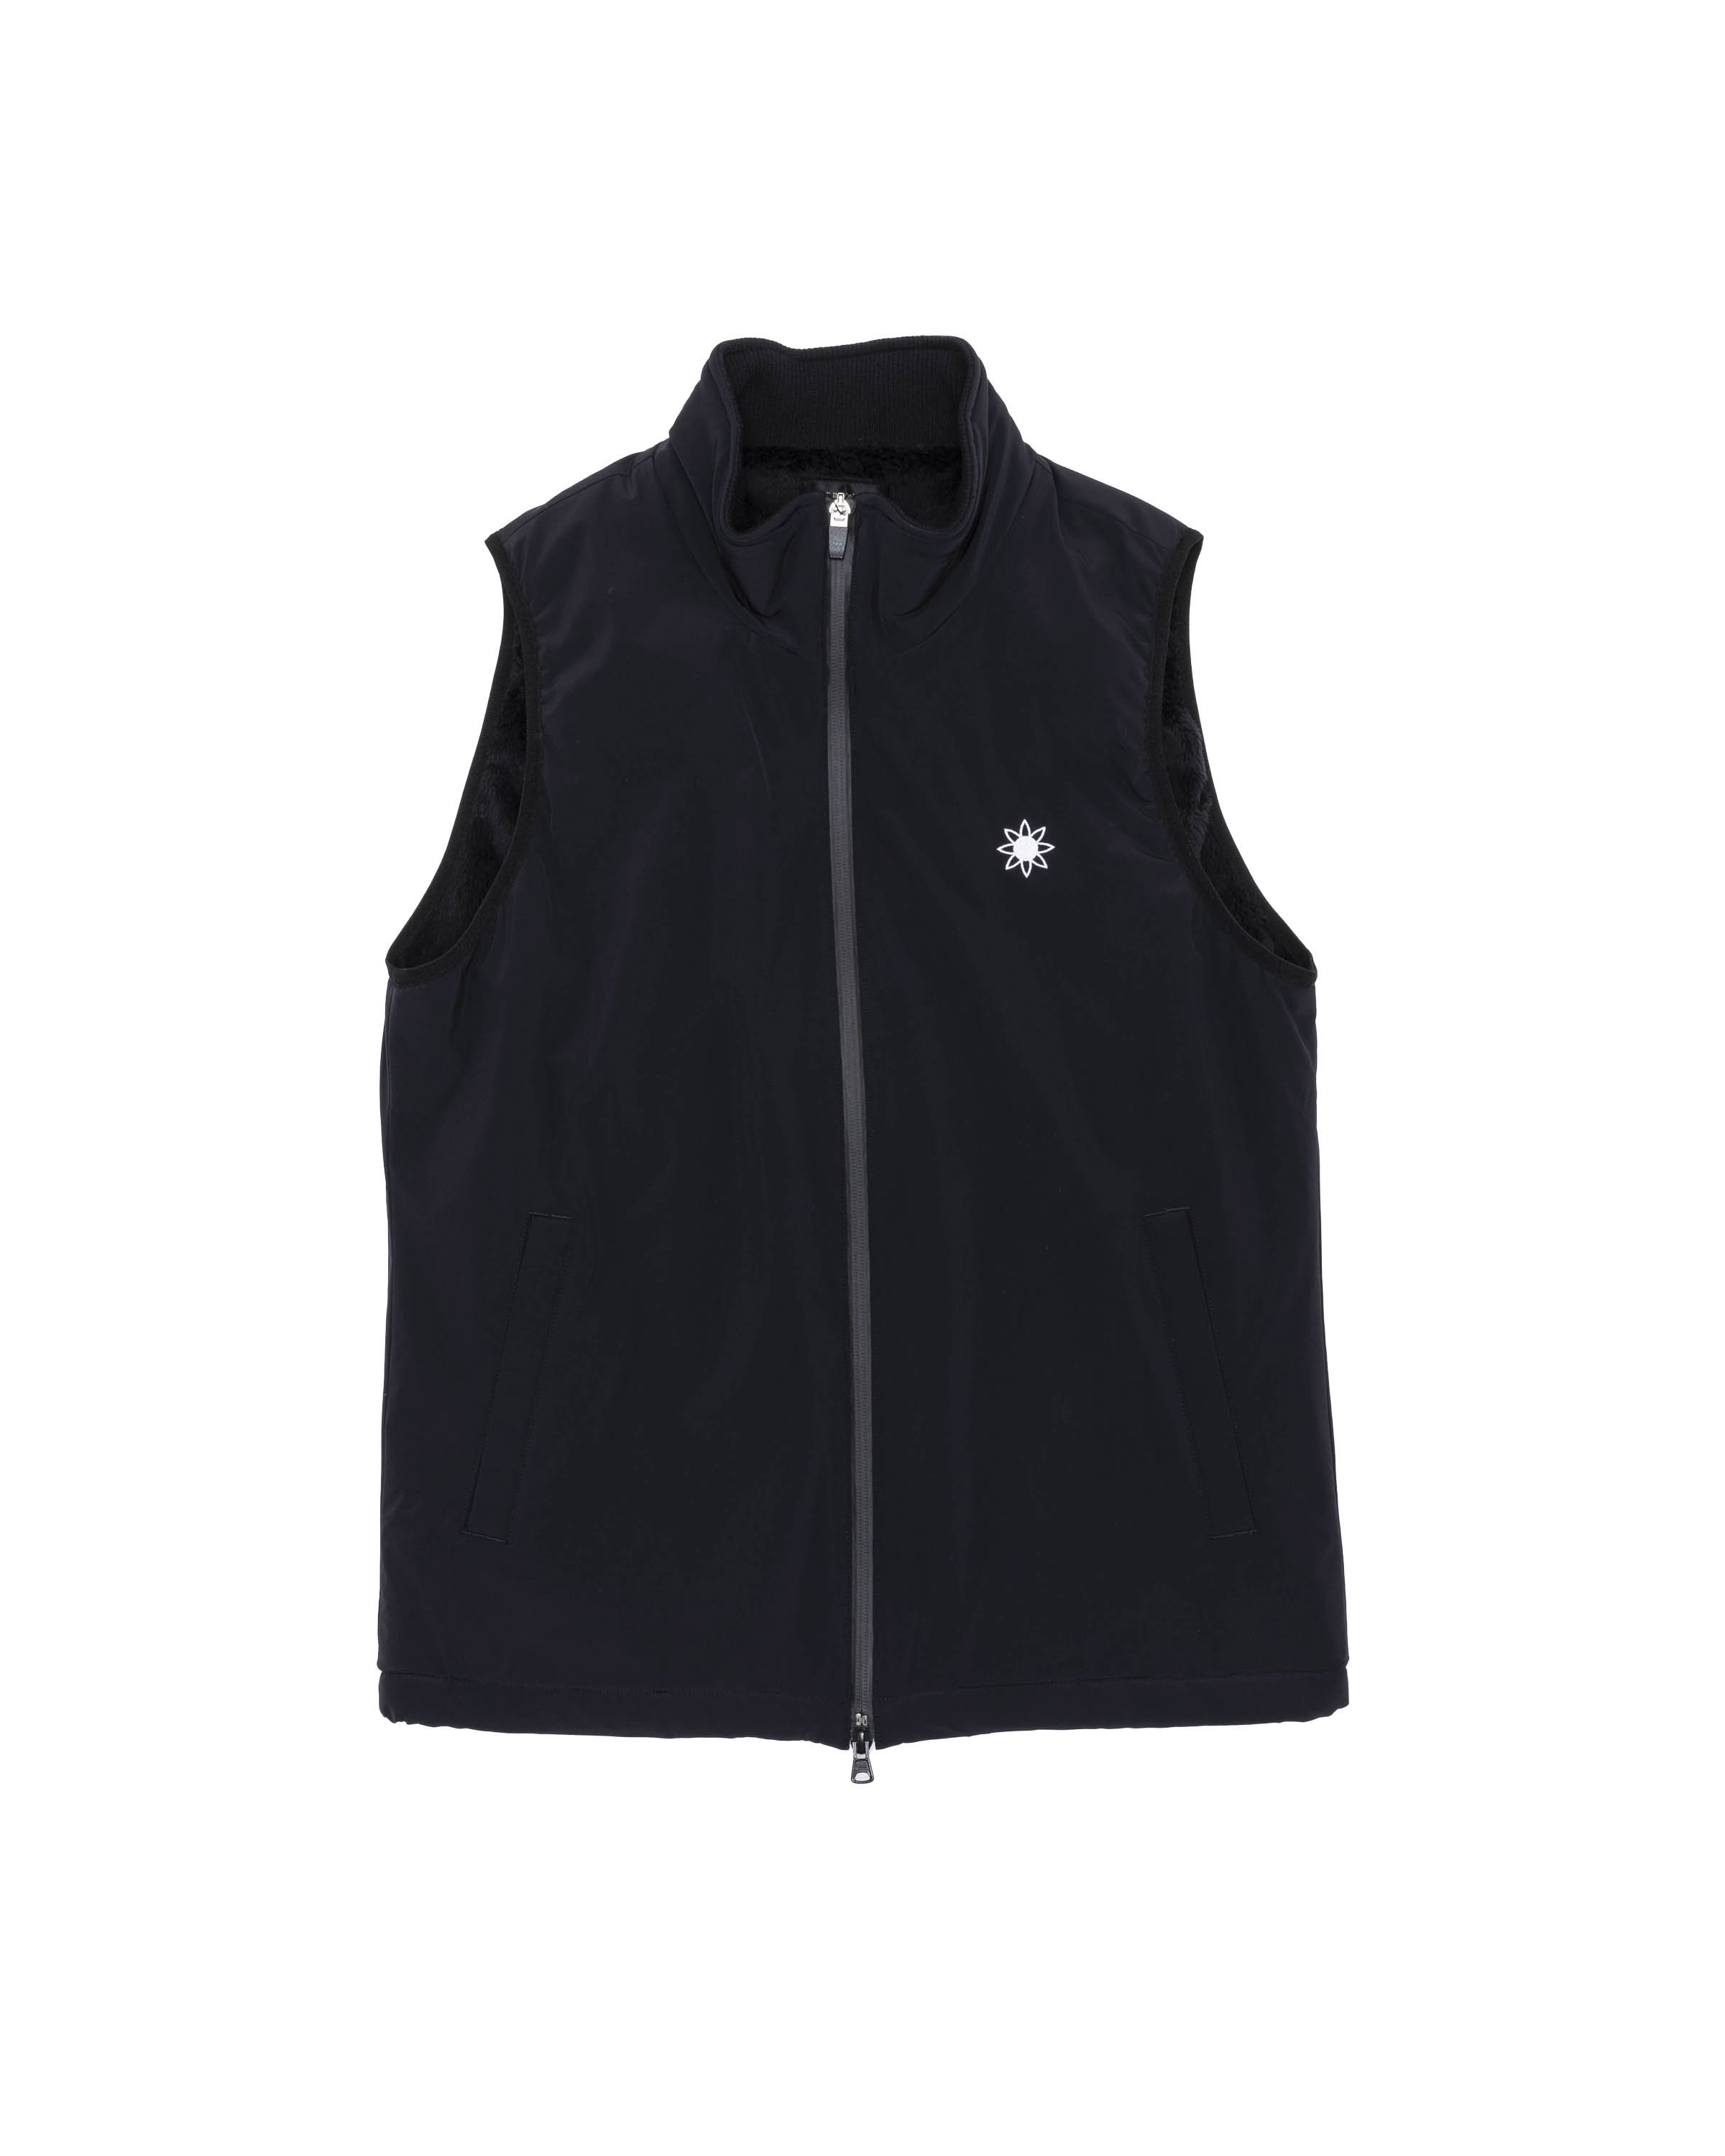 <img class='new_mark_img1' src='https://img.shop-pro.jp/img/new/icons14.gif' style='border:none;display:inline;margin:0px;padding:0px;width:auto;' />FUR VEST<br />black